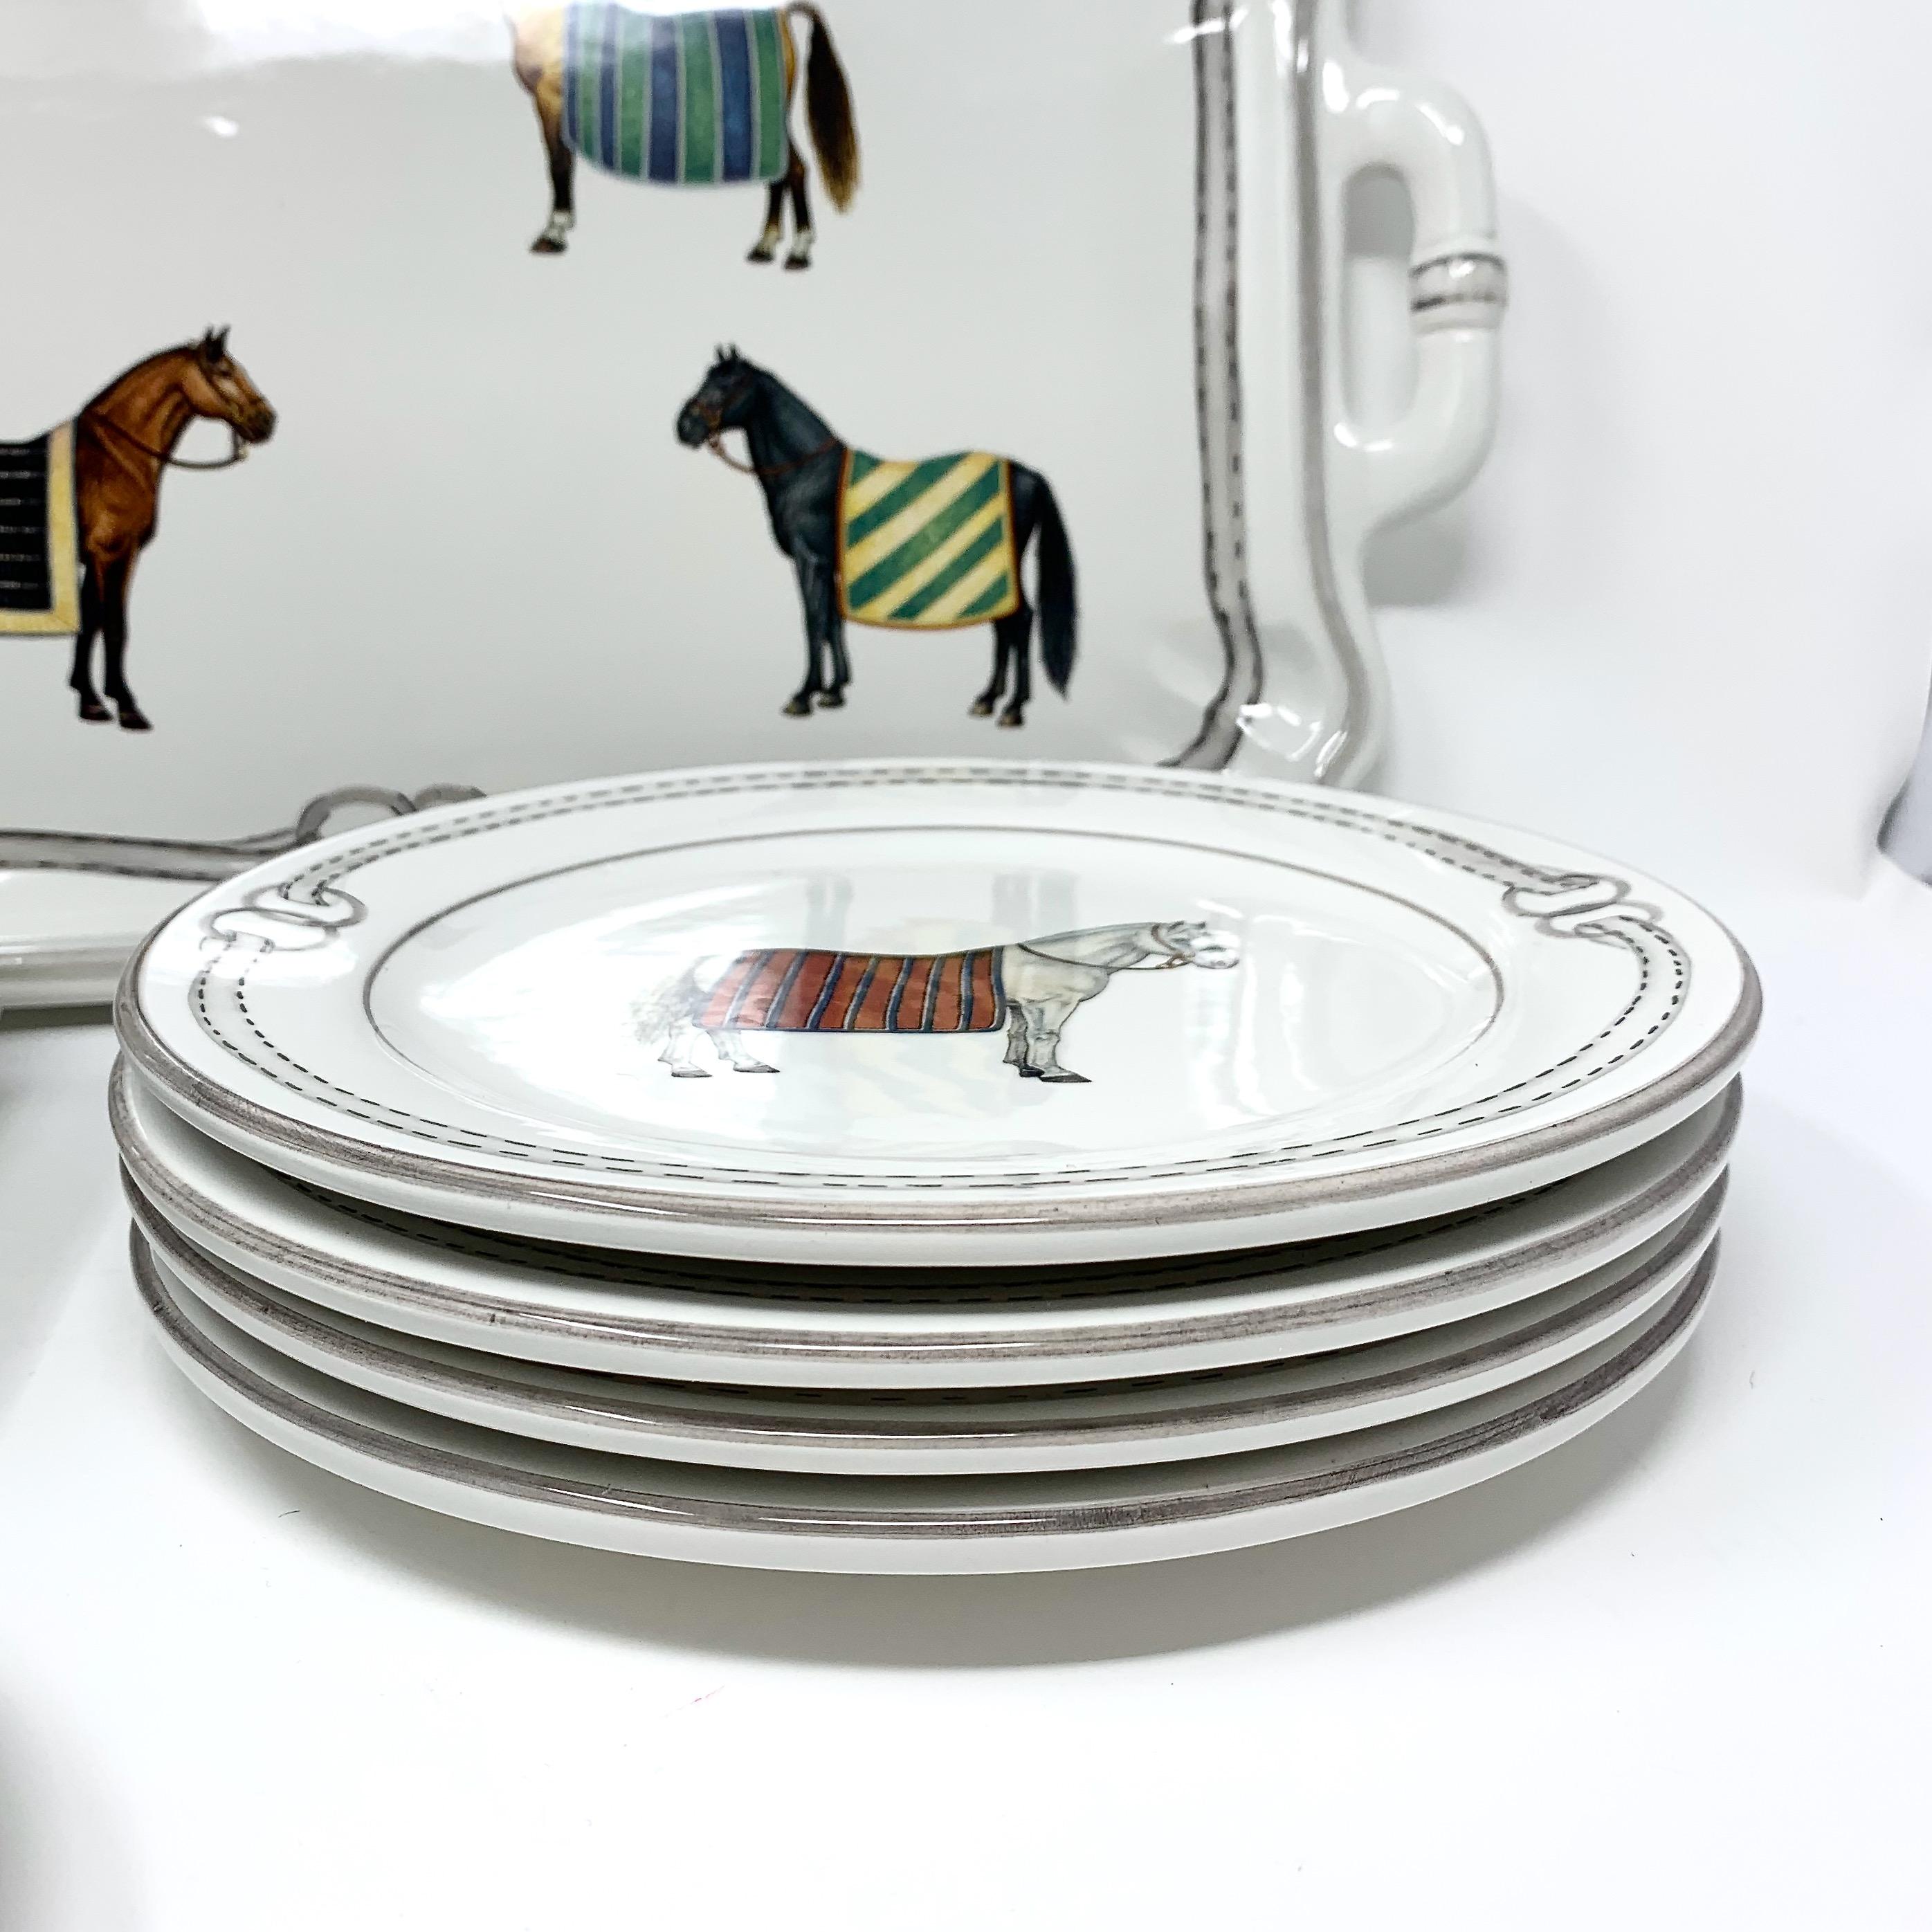 Devon Equestrian Ceramic Dinner Plates S/4, Made in Italy In New Condition For Sale In West Chester, PA